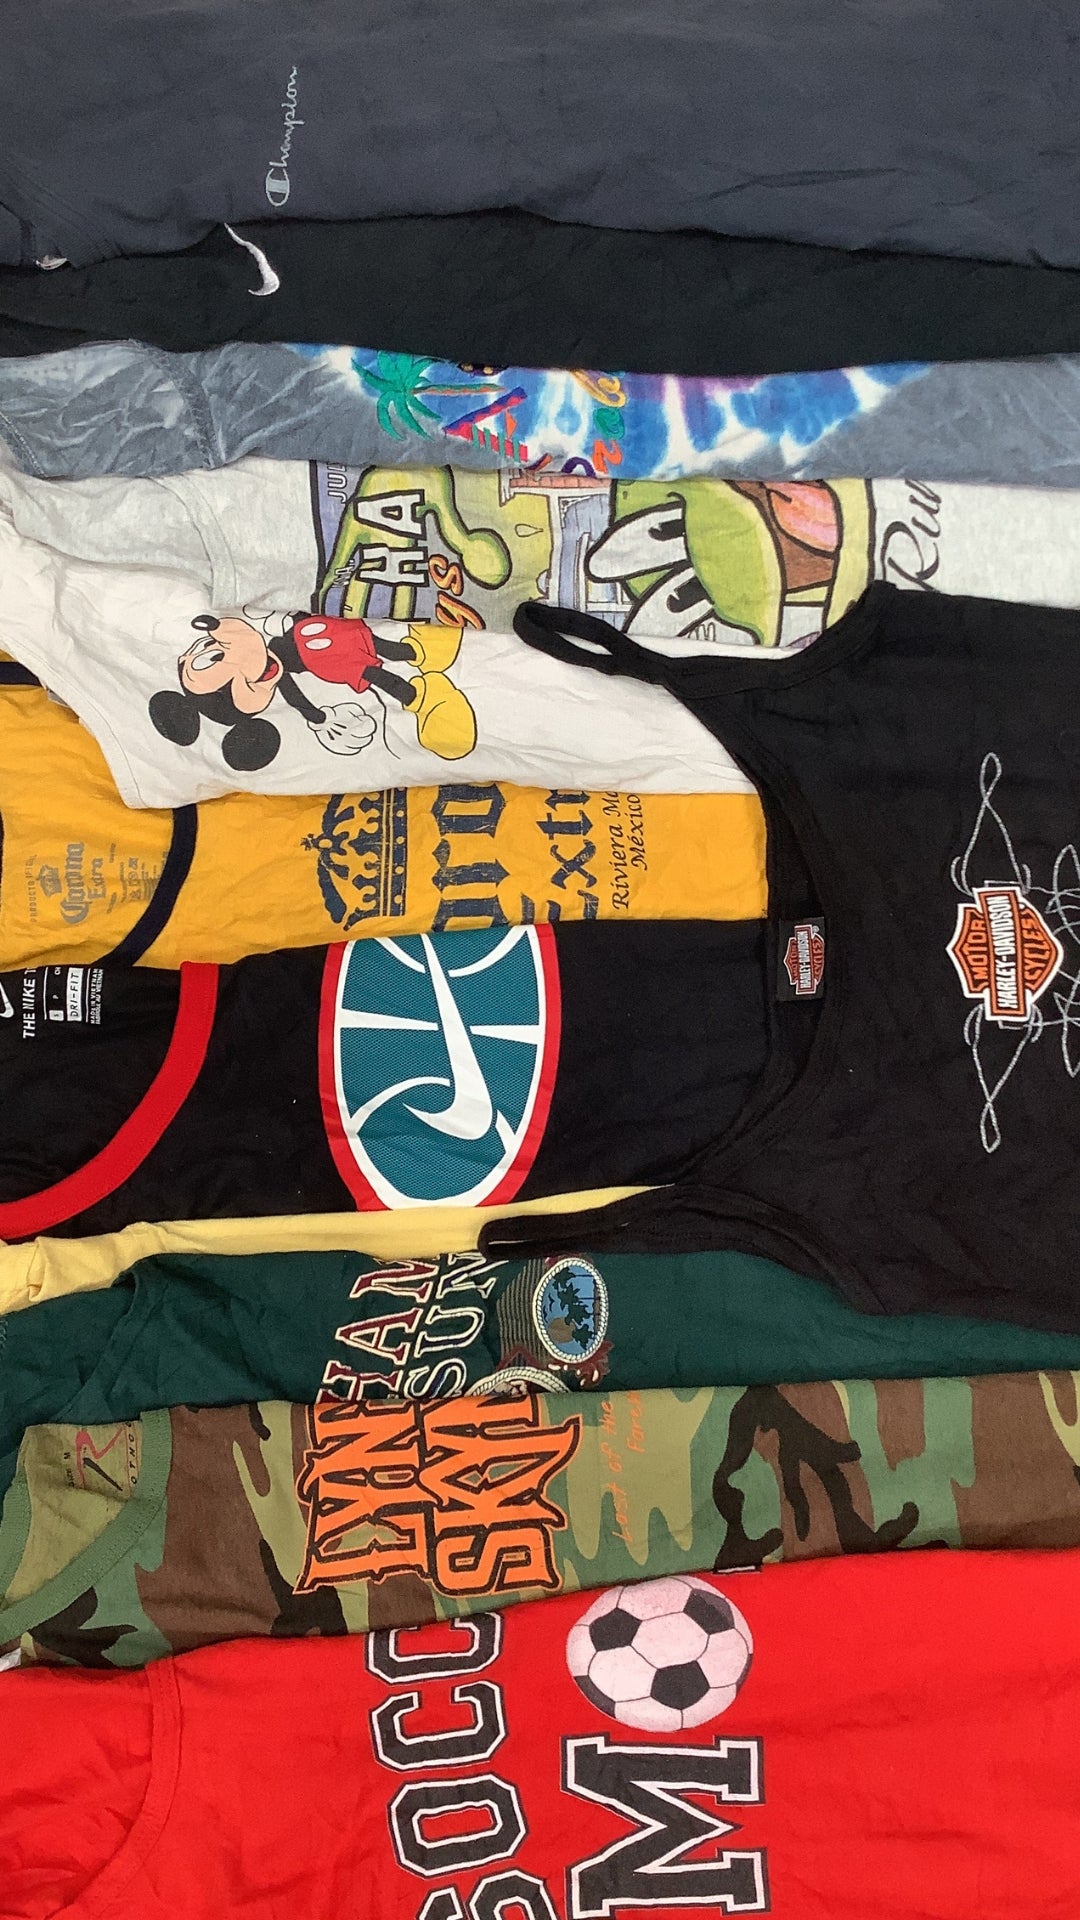 Wholesale vintage and secondhand branded sportswear vests bundle with Harley Davidson, Nike, Champion and more in bulk order with international delivery